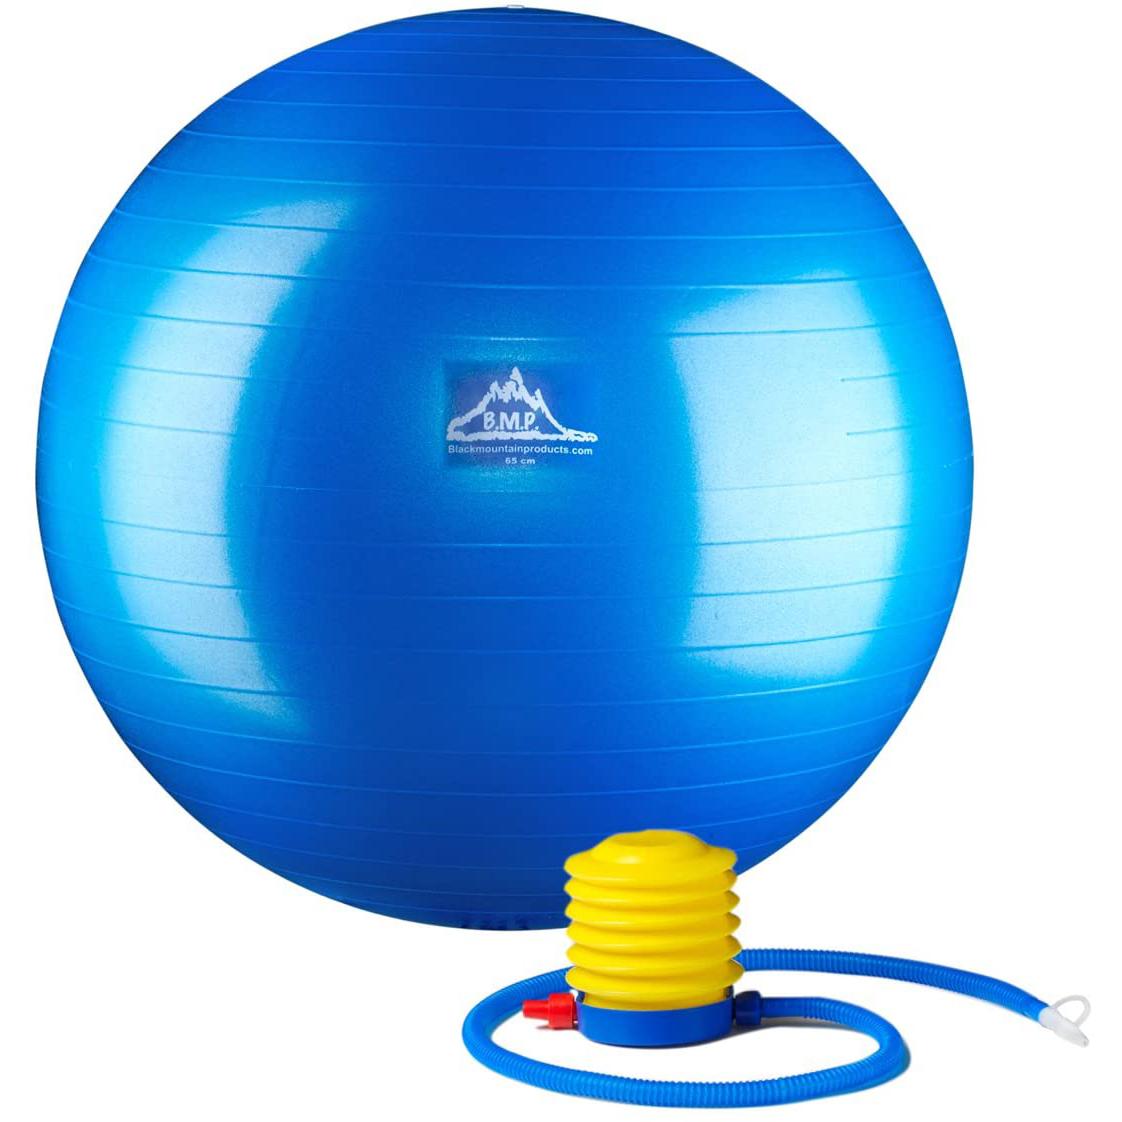 Professional Grade Stability Ball for $9.58